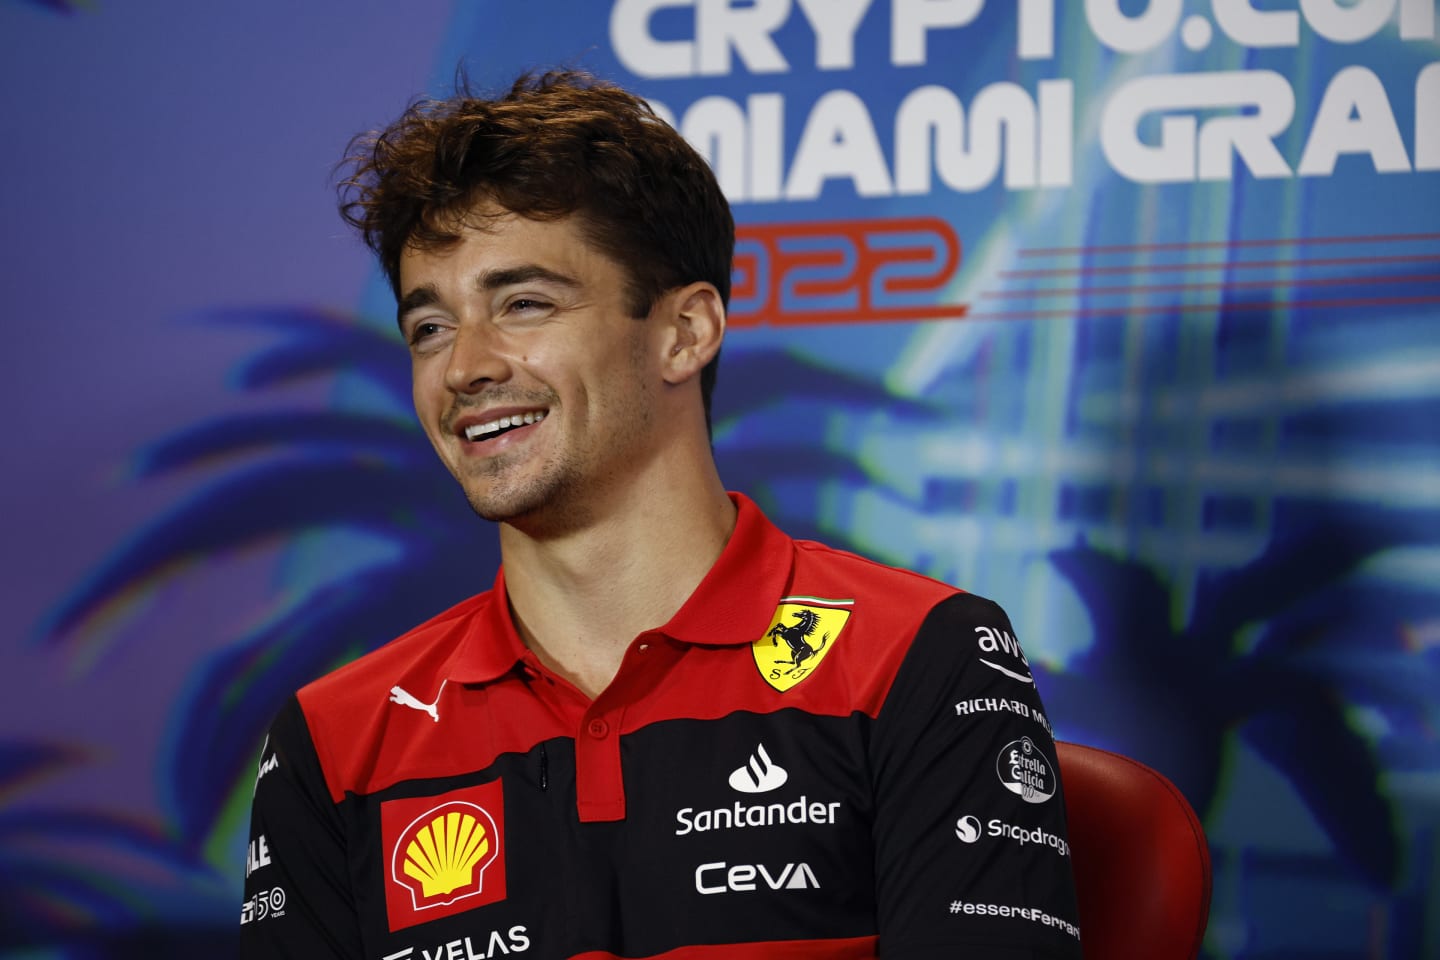 MIAMI, FLORIDA - MAY 06: Charles Leclerc of Monaco and Ferrari talks in the Drivers Press Conference prior to practice ahead of the F1 Grand Prix of Miami at the Miami International Autodrome on May 06, 2022 in Miami, Florida. (Photo by Jared C. Tilton/Getty Images)